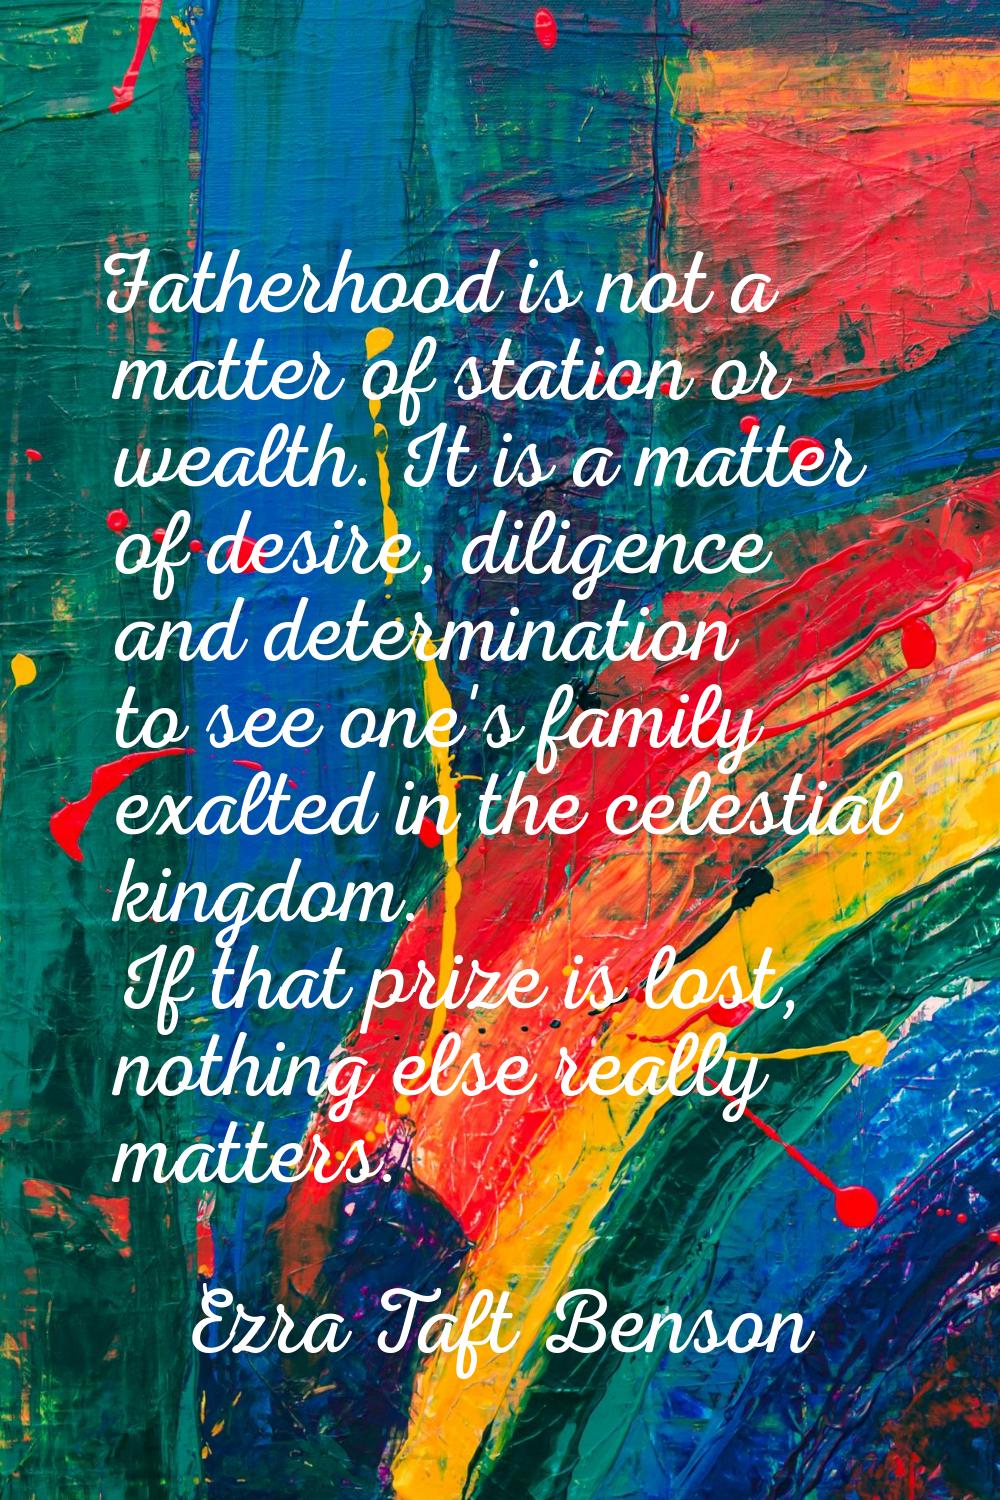 Fatherhood is not a matter of station or wealth. It is a matter of desire, diligence and determinat